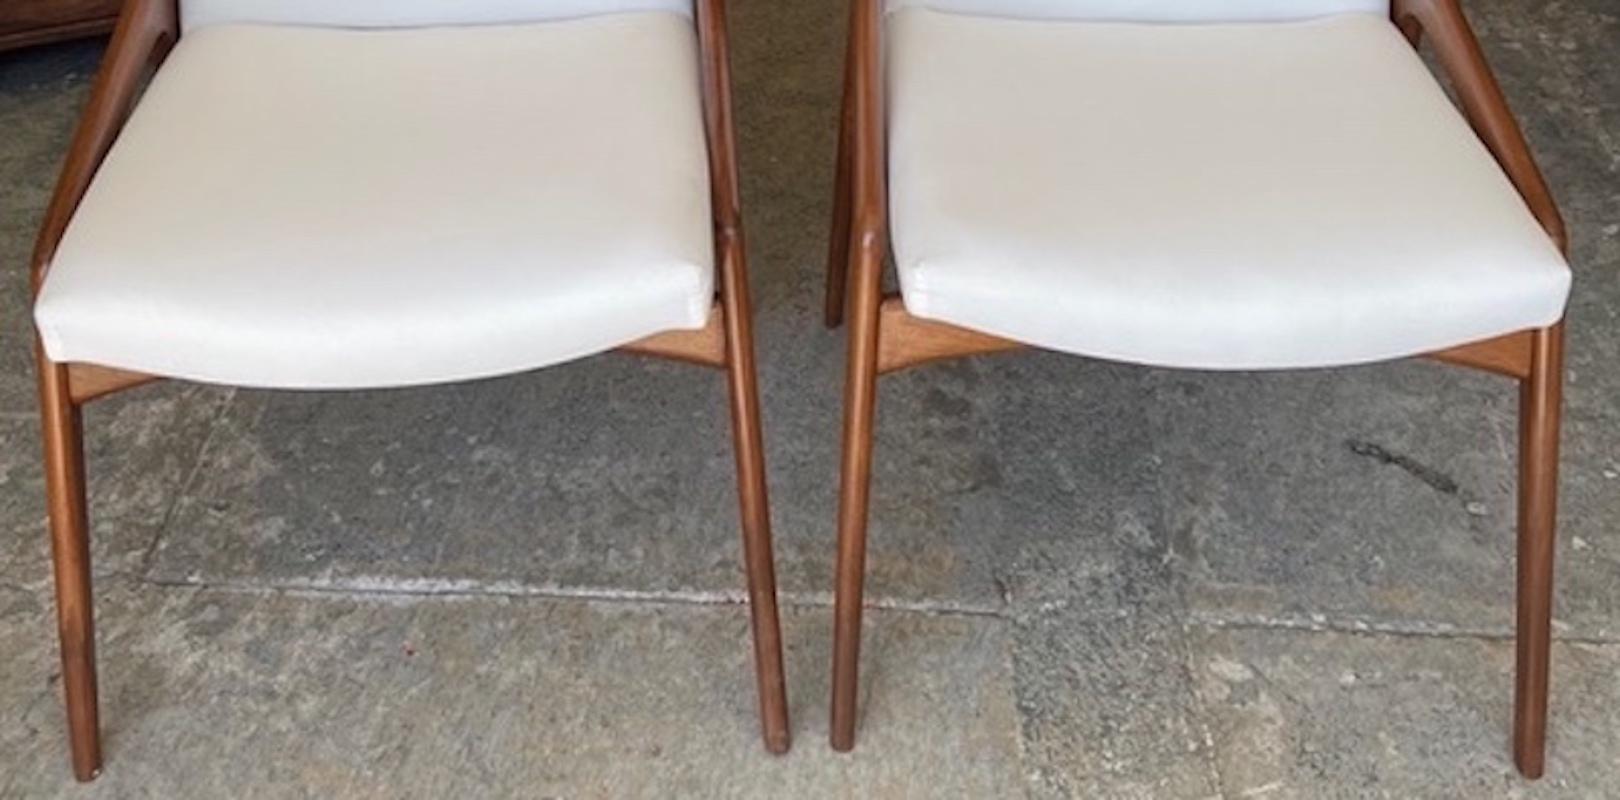 Reproduction Danish Style Alderwood Dining Chairs Upholstered For Sale 3